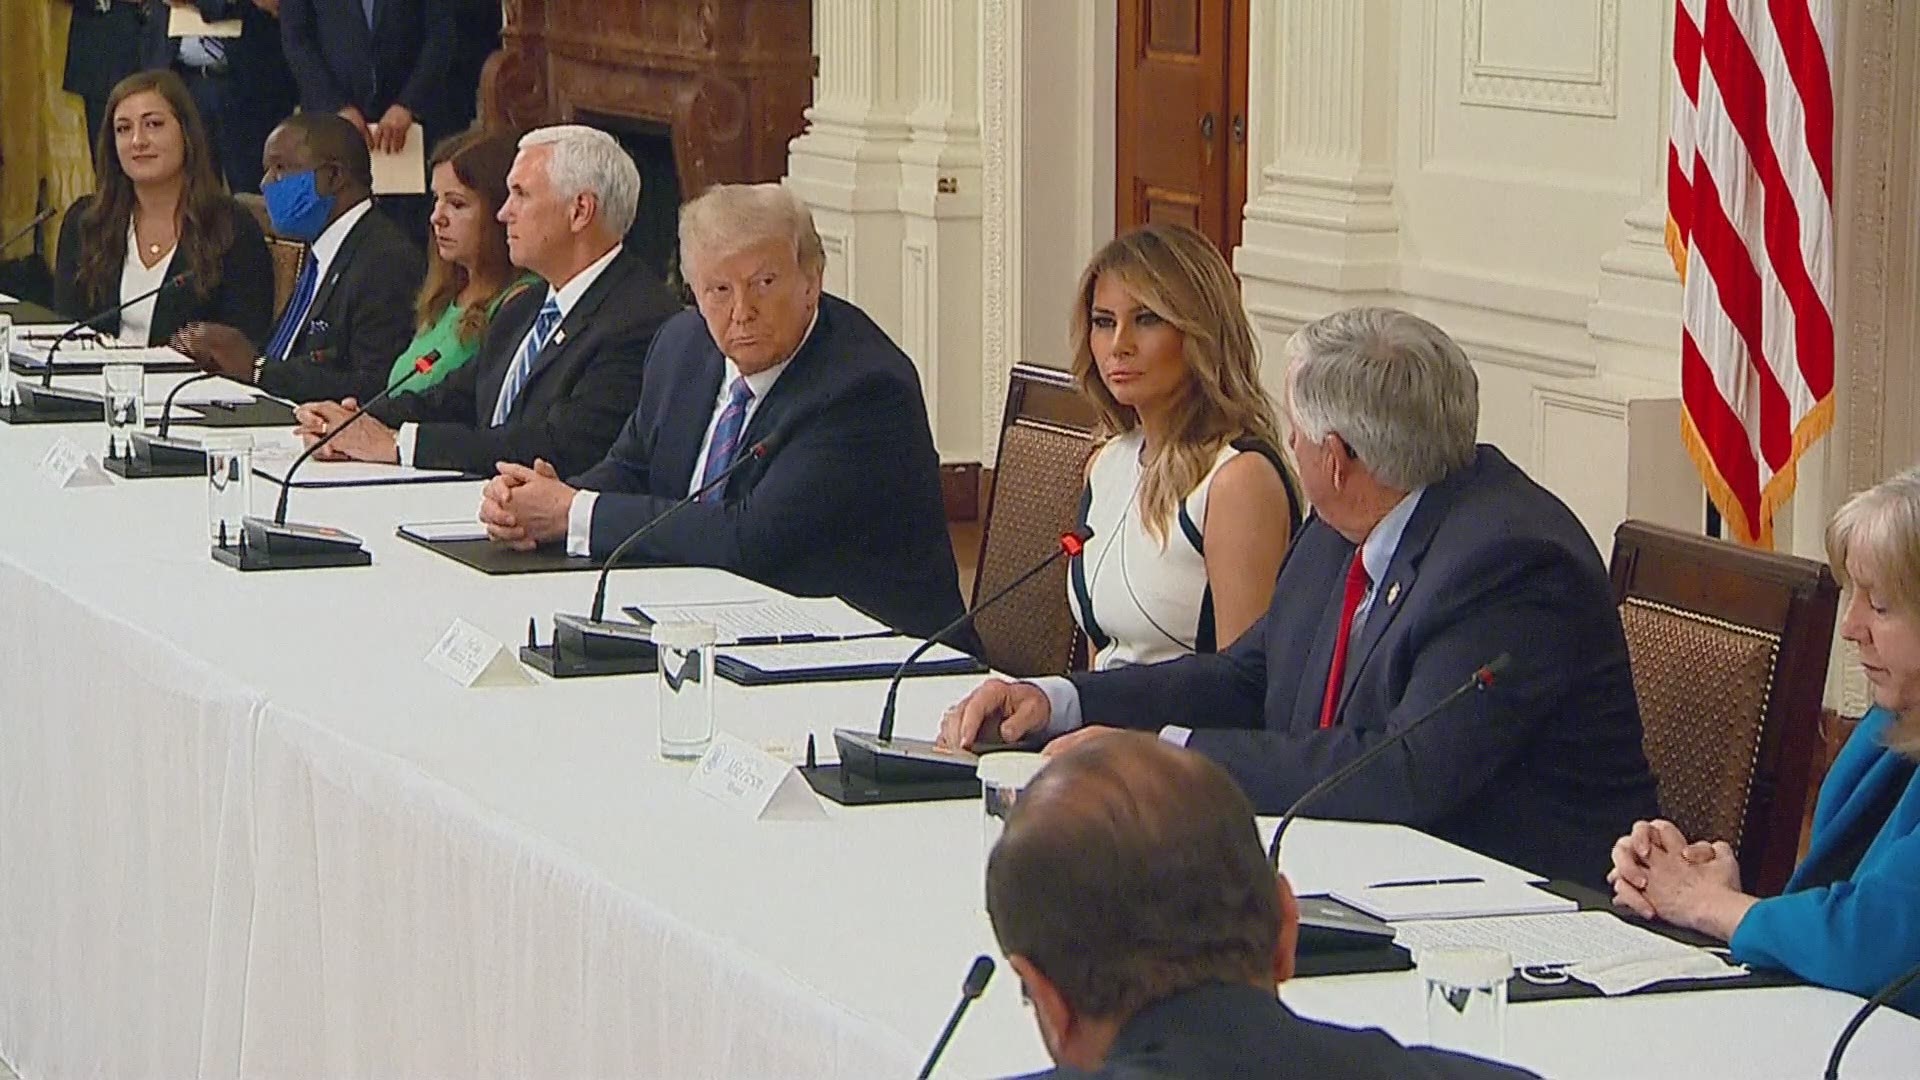 During a round table discussion about schools reopening, Trump asked Gov. Parson about changing the name of St. Louis